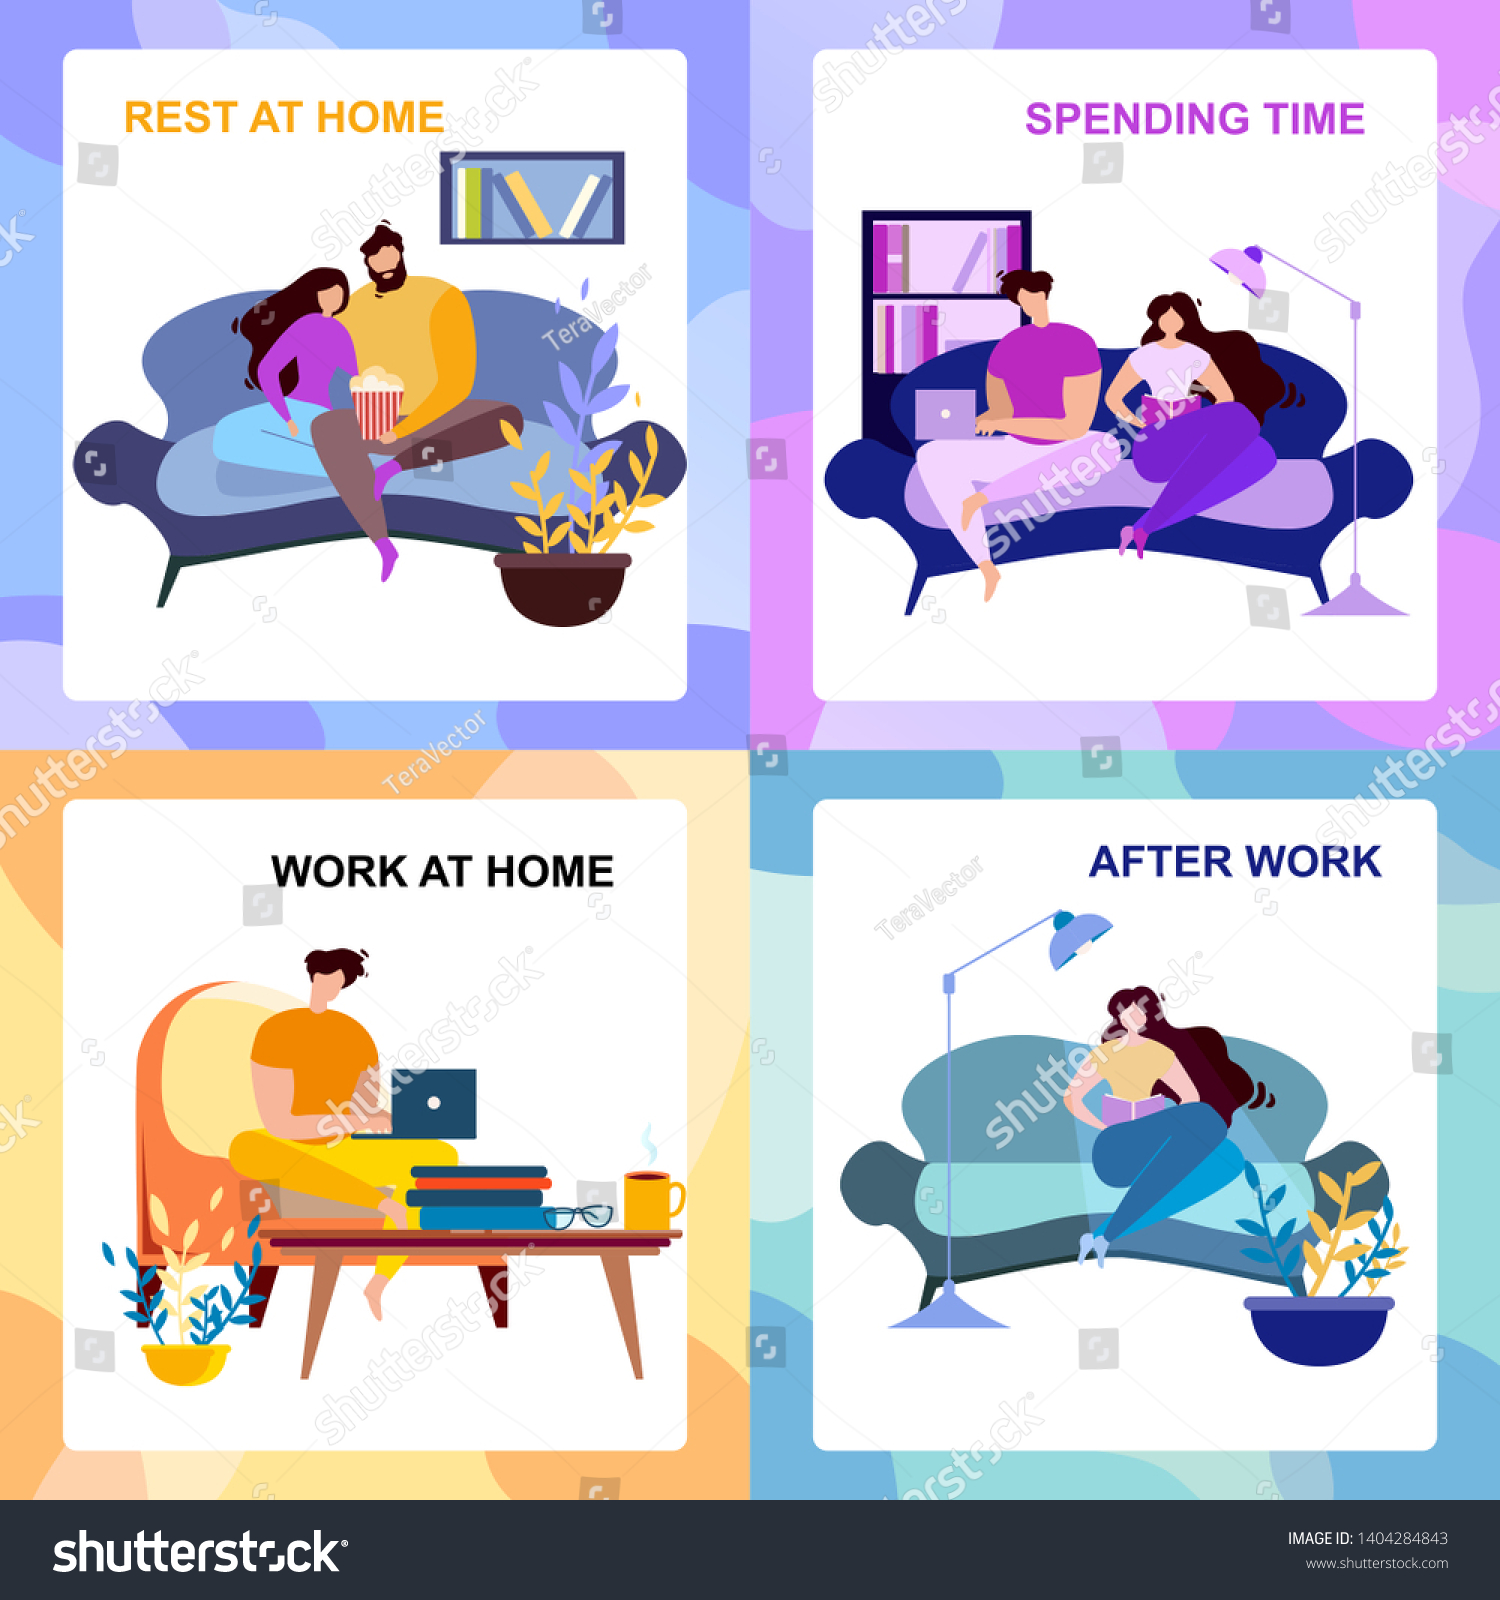 SVG of After Work, Rest at Home, Spending Time Banner Set. Cartoon People Indoors Rest and Read. Computer Freelance Work Vector Illustration. Couple Watch TV, Romantic Evening Family Entertainment svg